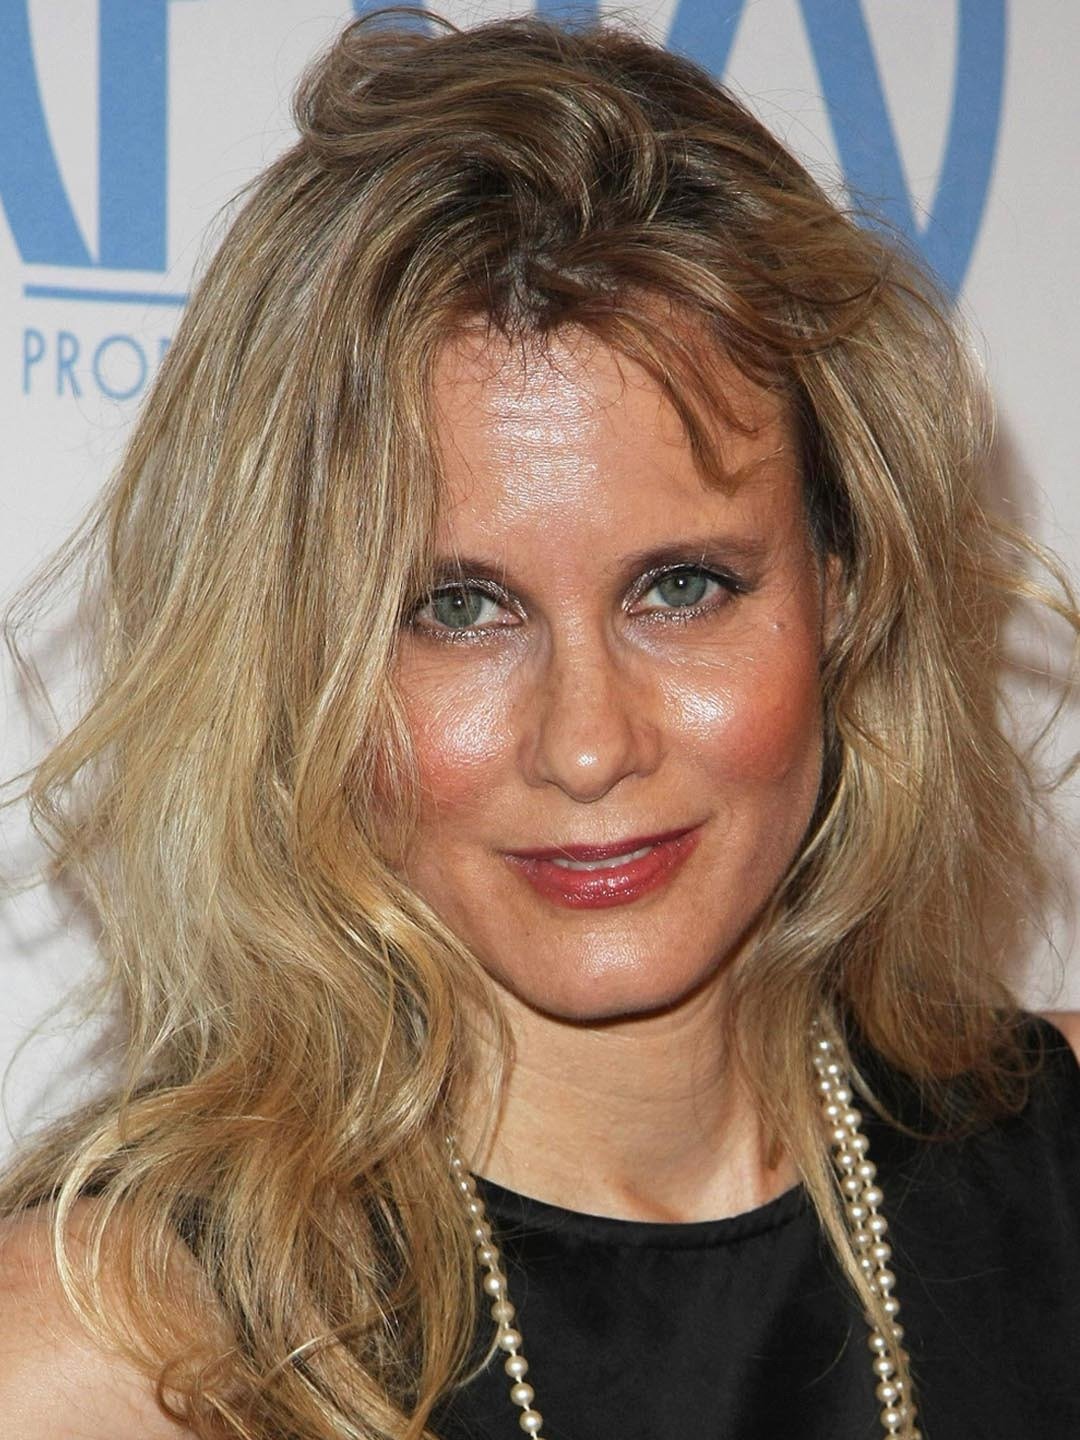 How tall is Lori Singer?